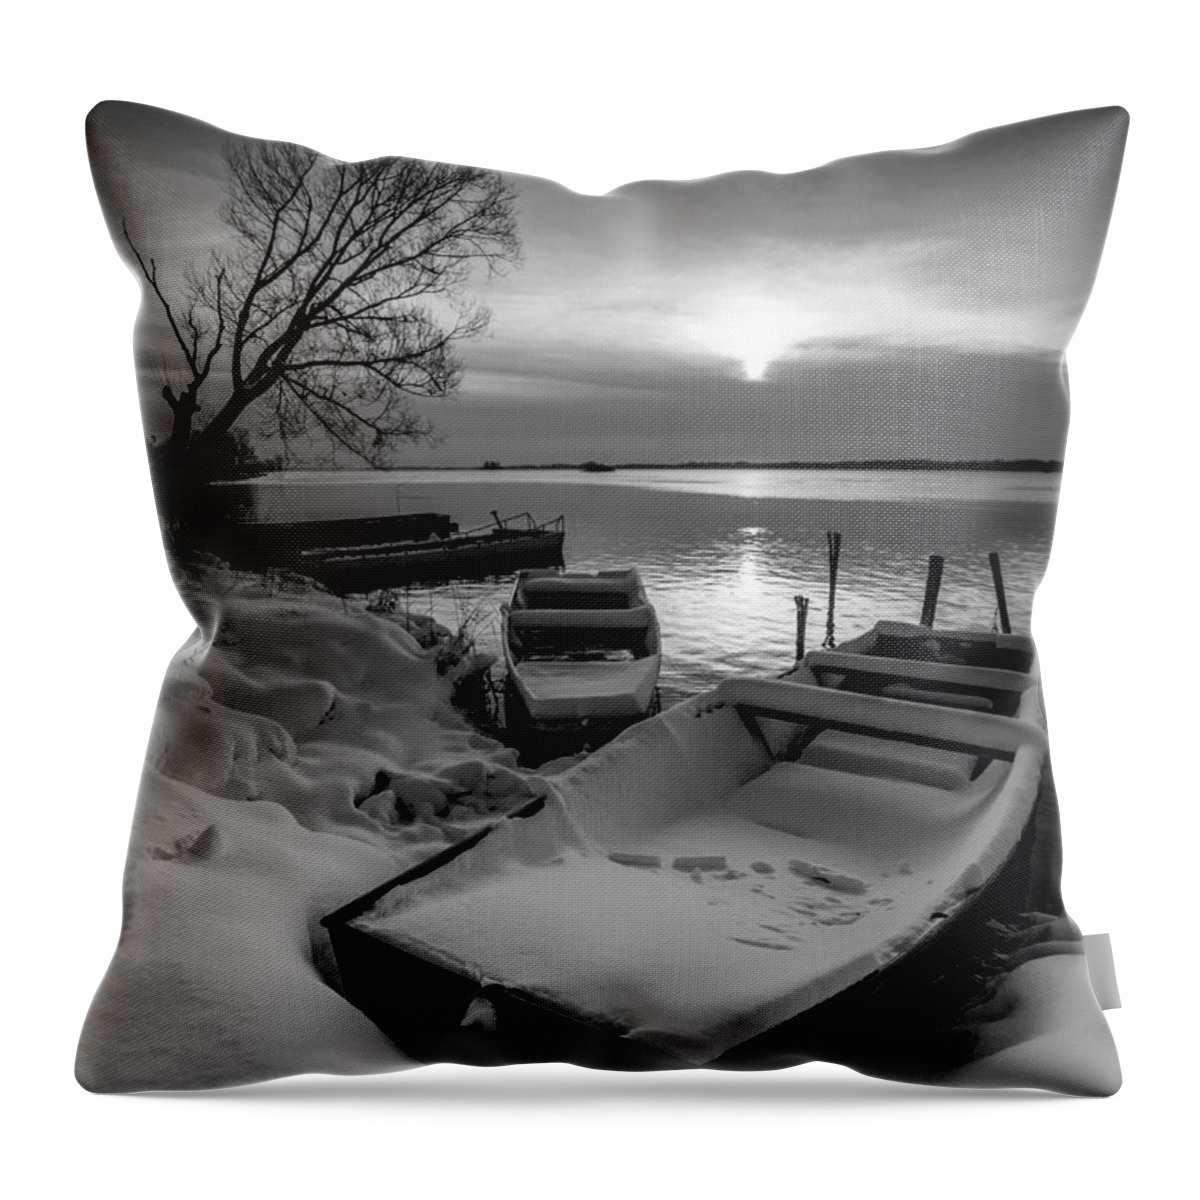 Landscapes Throw Pillow featuring the photograph Serenity by Davorin Mance